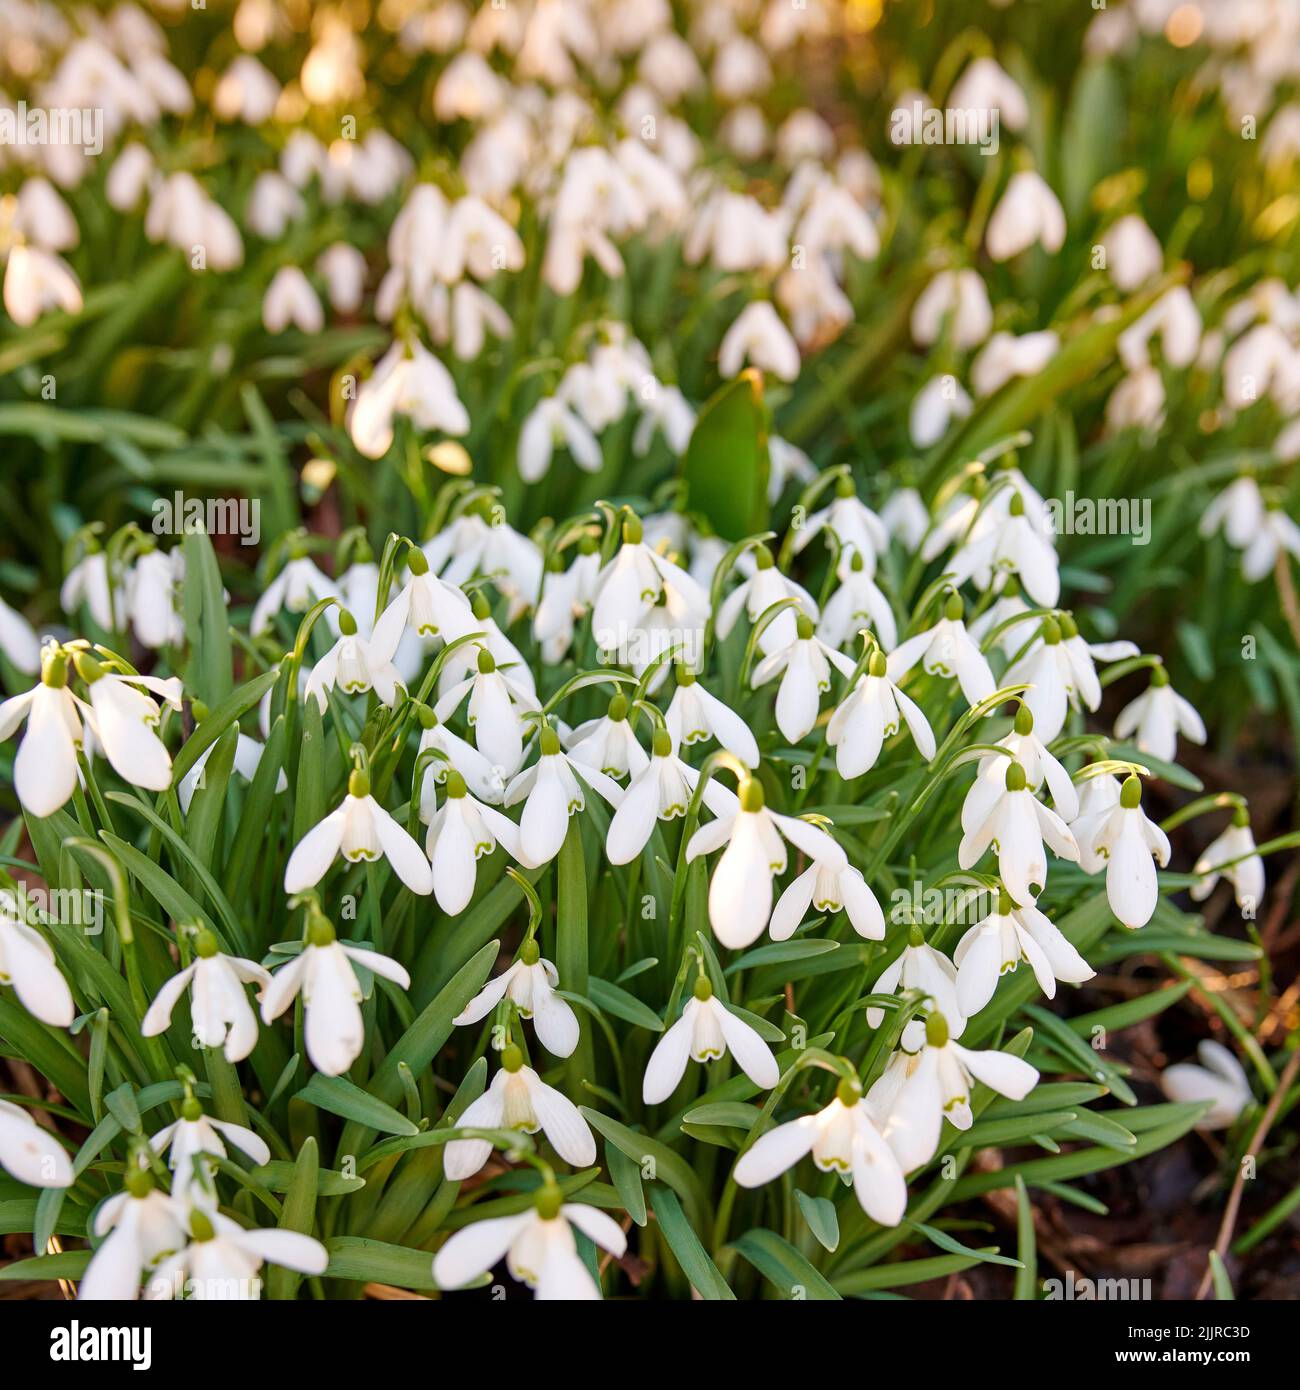 Beautiful, pretty and green flowers growing in their natural habitat in a dense forest. Galanthus woronowii or woronows snowdrop plant species Stock Photo